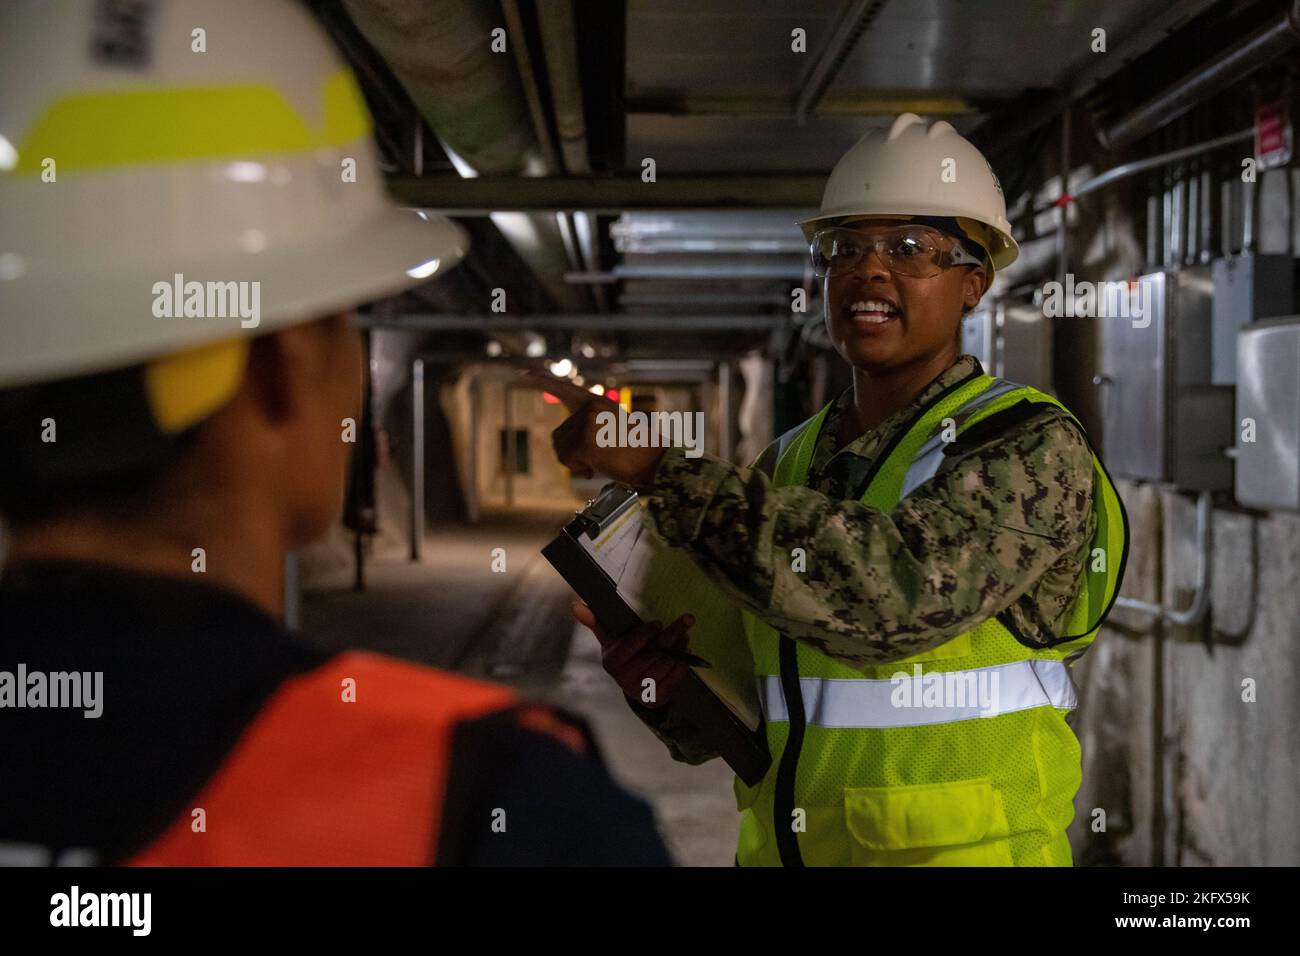 U.S. Navy Lt. Cmdr. Malia Gonzalez, Joint Task Force-Red Hill (JTF-RH) Safety Advisor, speaks with a first responder during a Red Hill Bulk Fuel Storage Facility (RHBFSF) Stakeholder Safety Walkthrough at the facility in Halawa, Hawaii, Oct. 12, 2022. JTF-RH was established by the Department of Defense to ensure the safe and expeditious defueling of the RHBFSF. Stock Photo